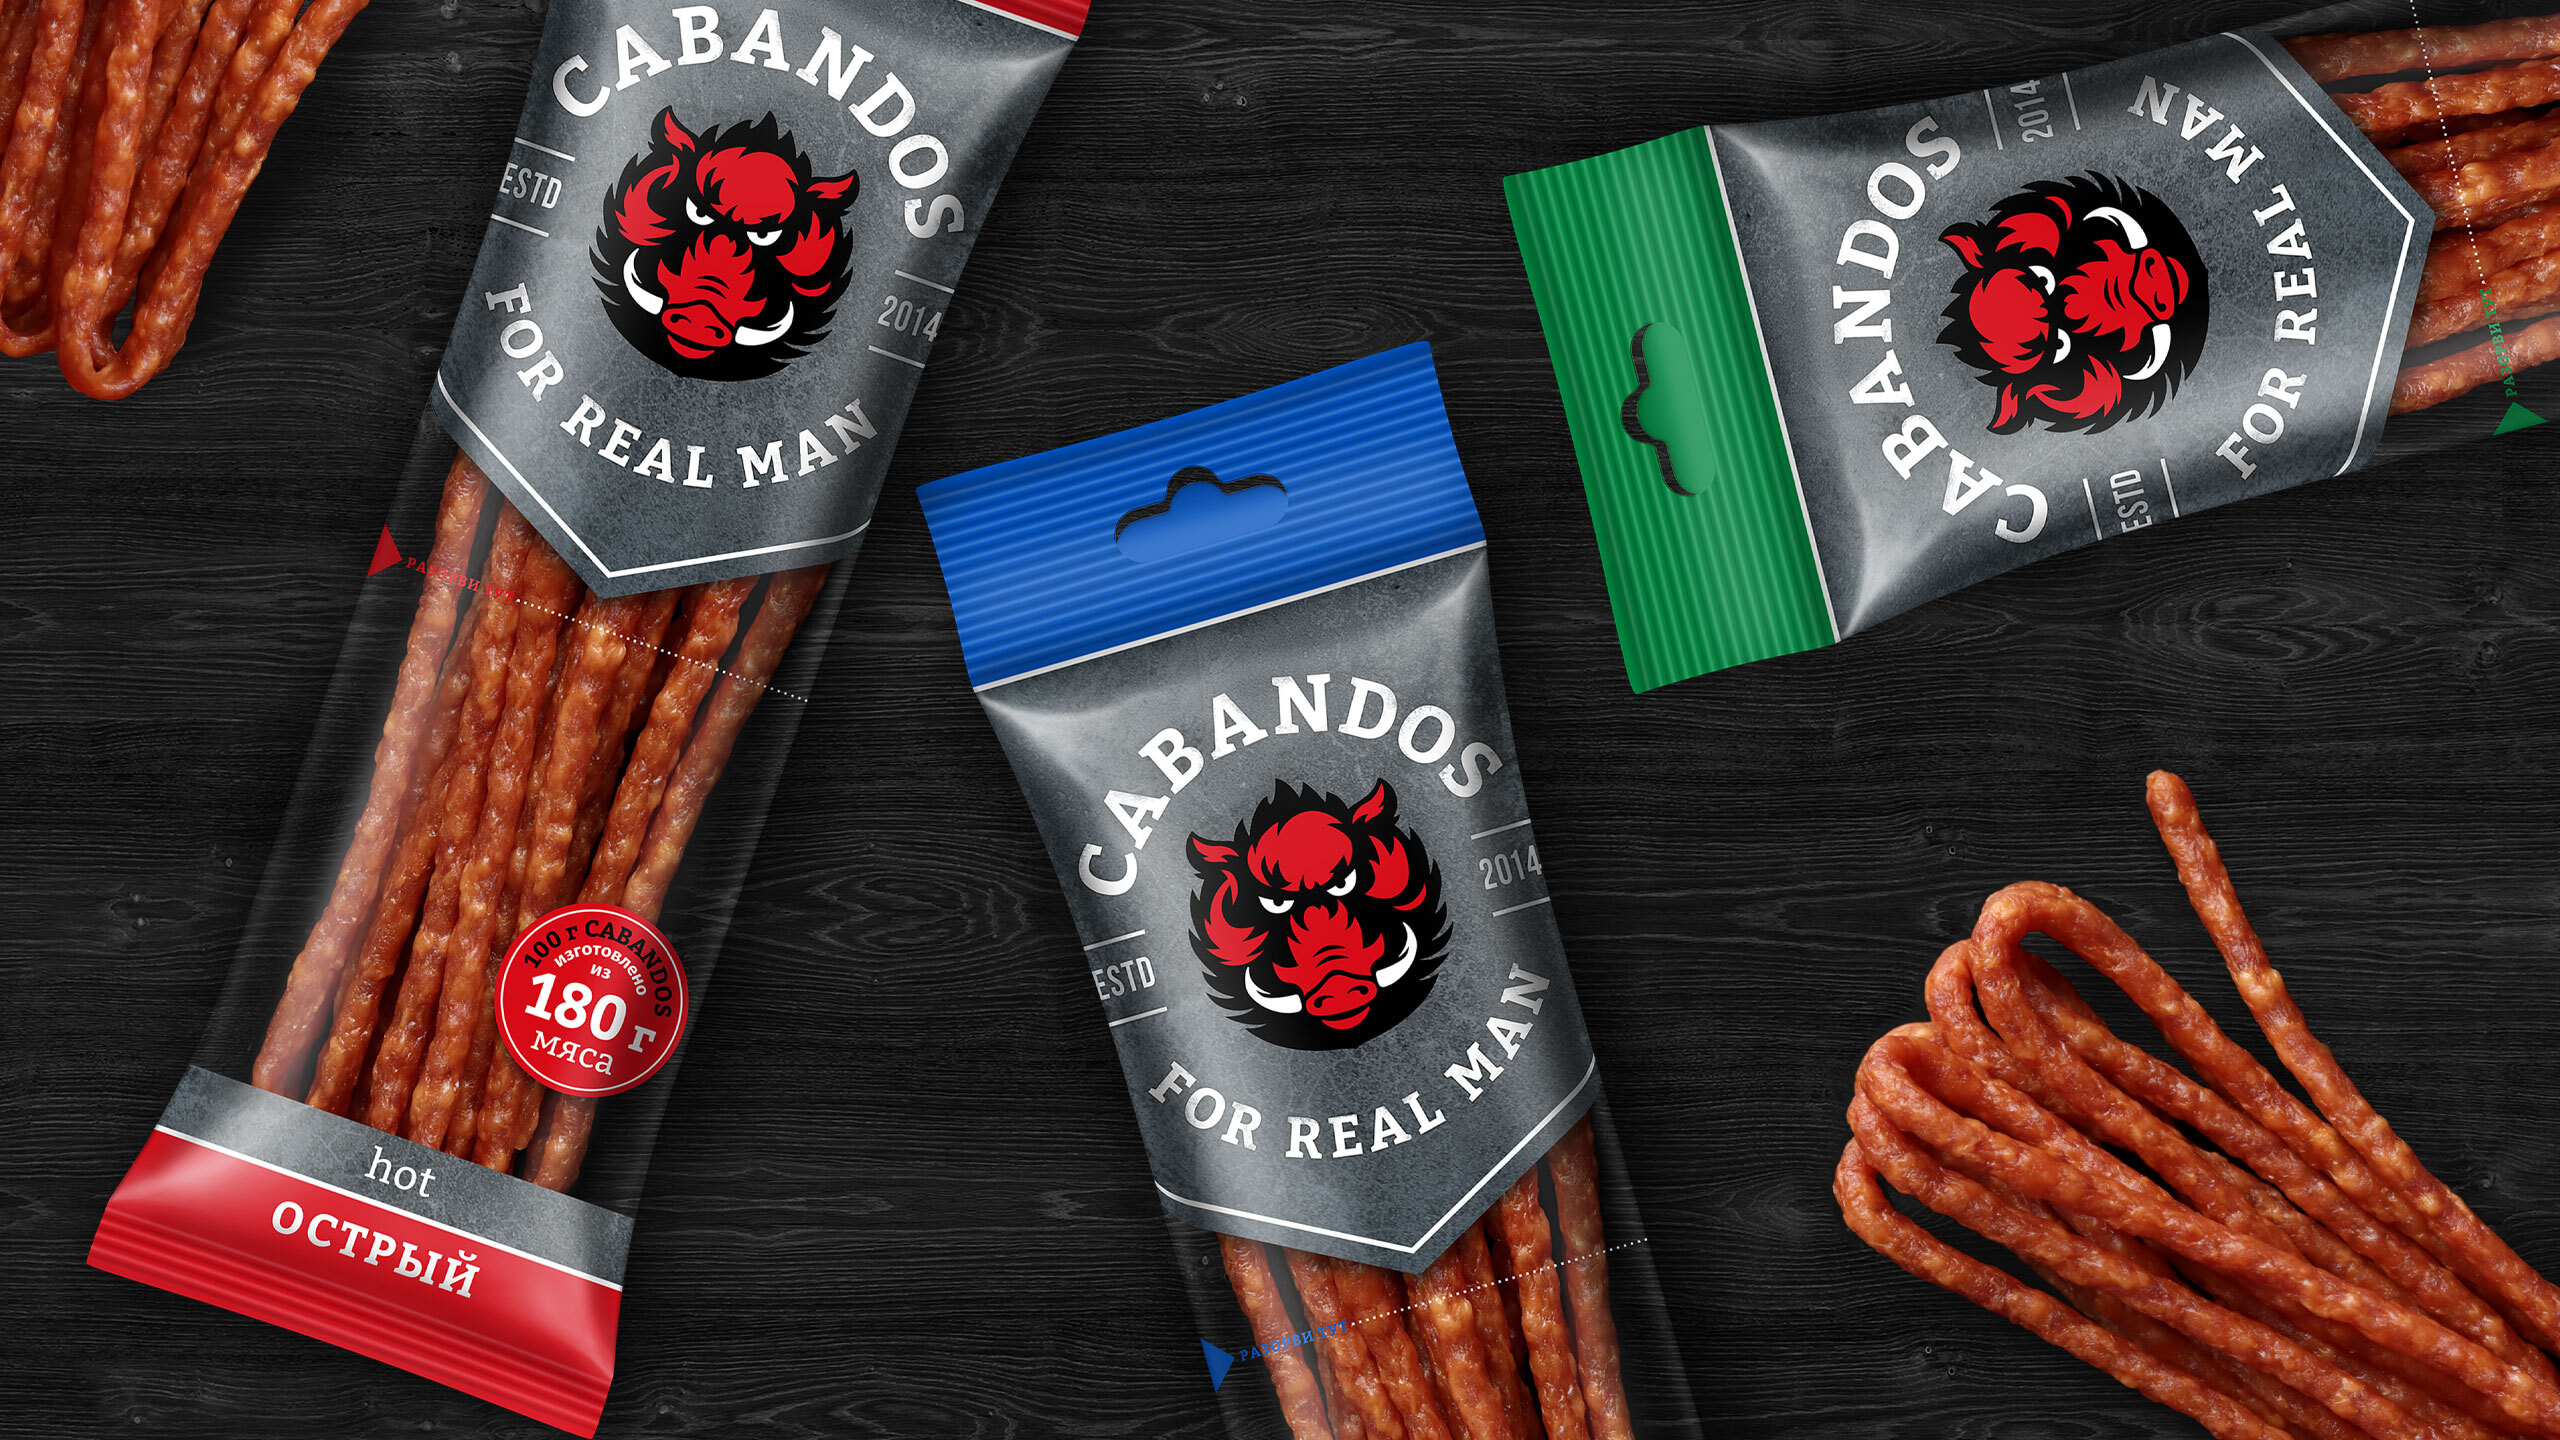 Dozen Agency Creates The First Manly Snack Branding for Cabandos